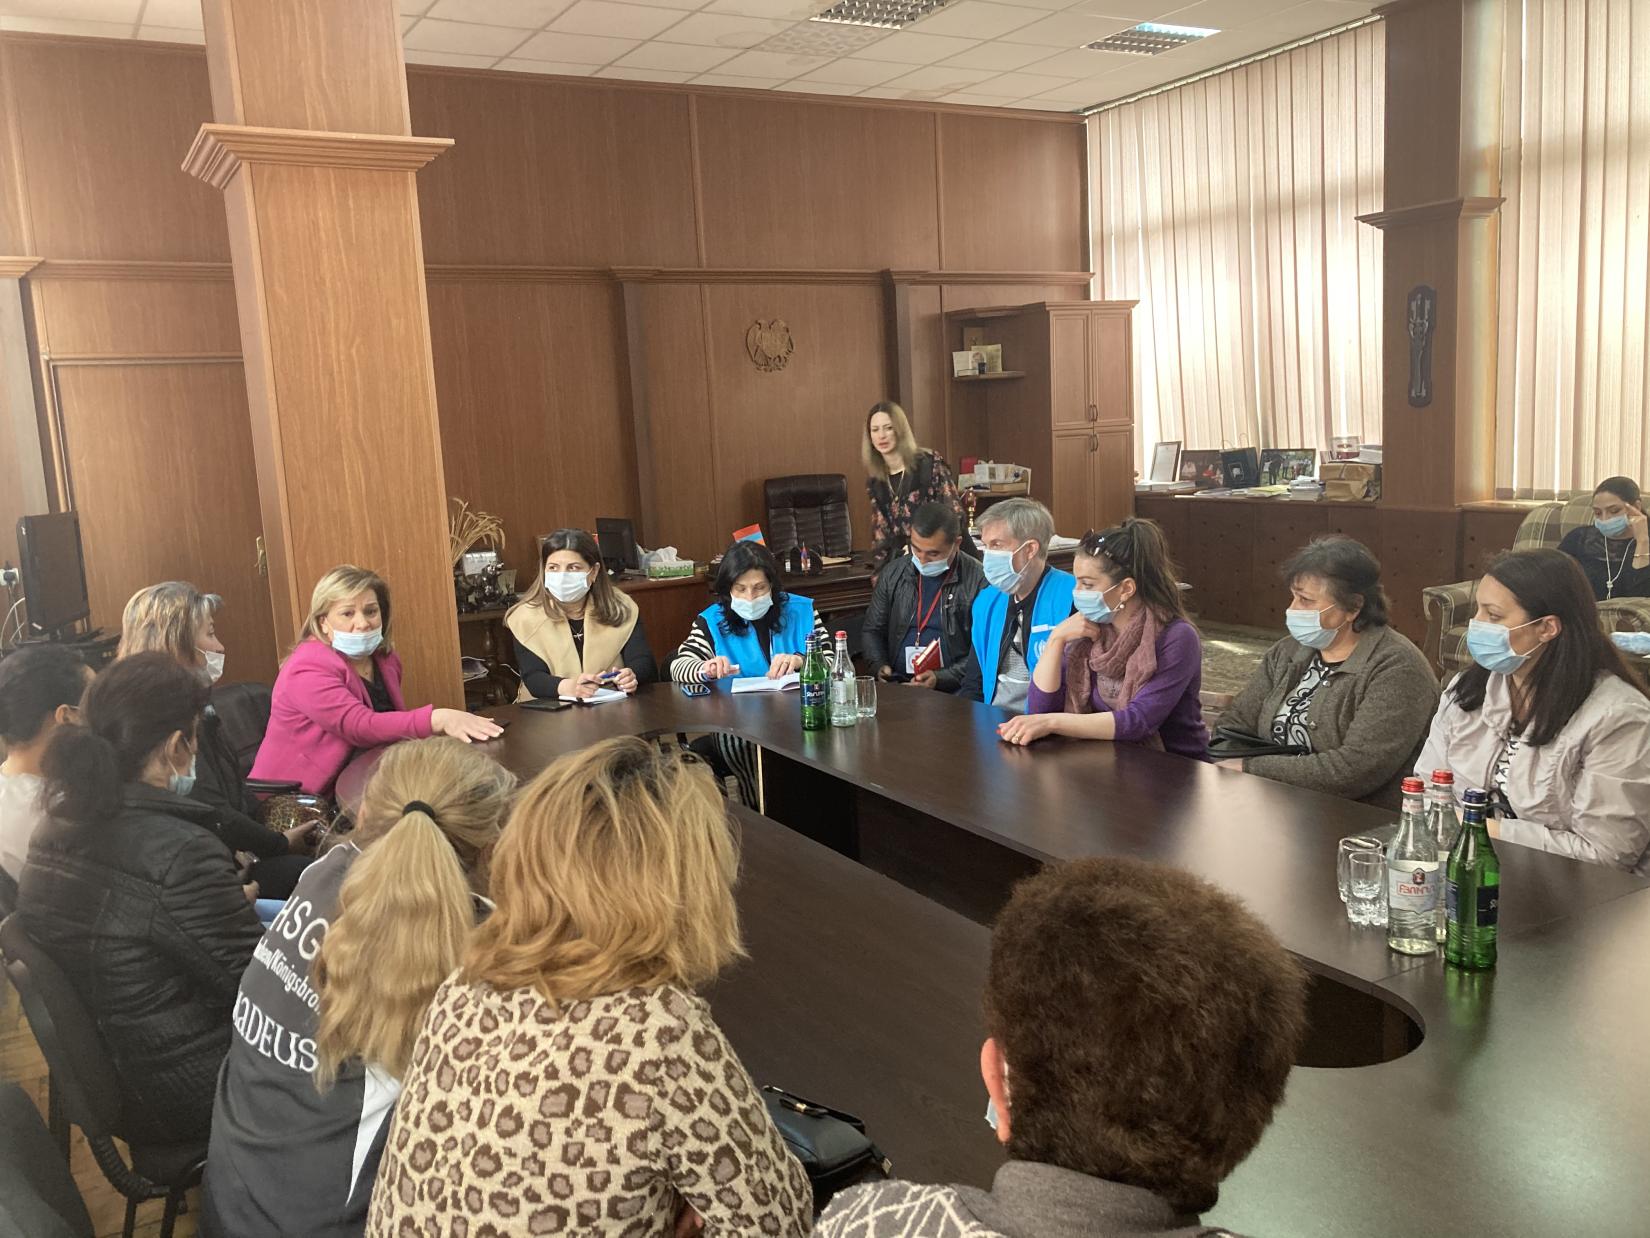 UNHCR staff at the meeting with a group of women displaced from NK.